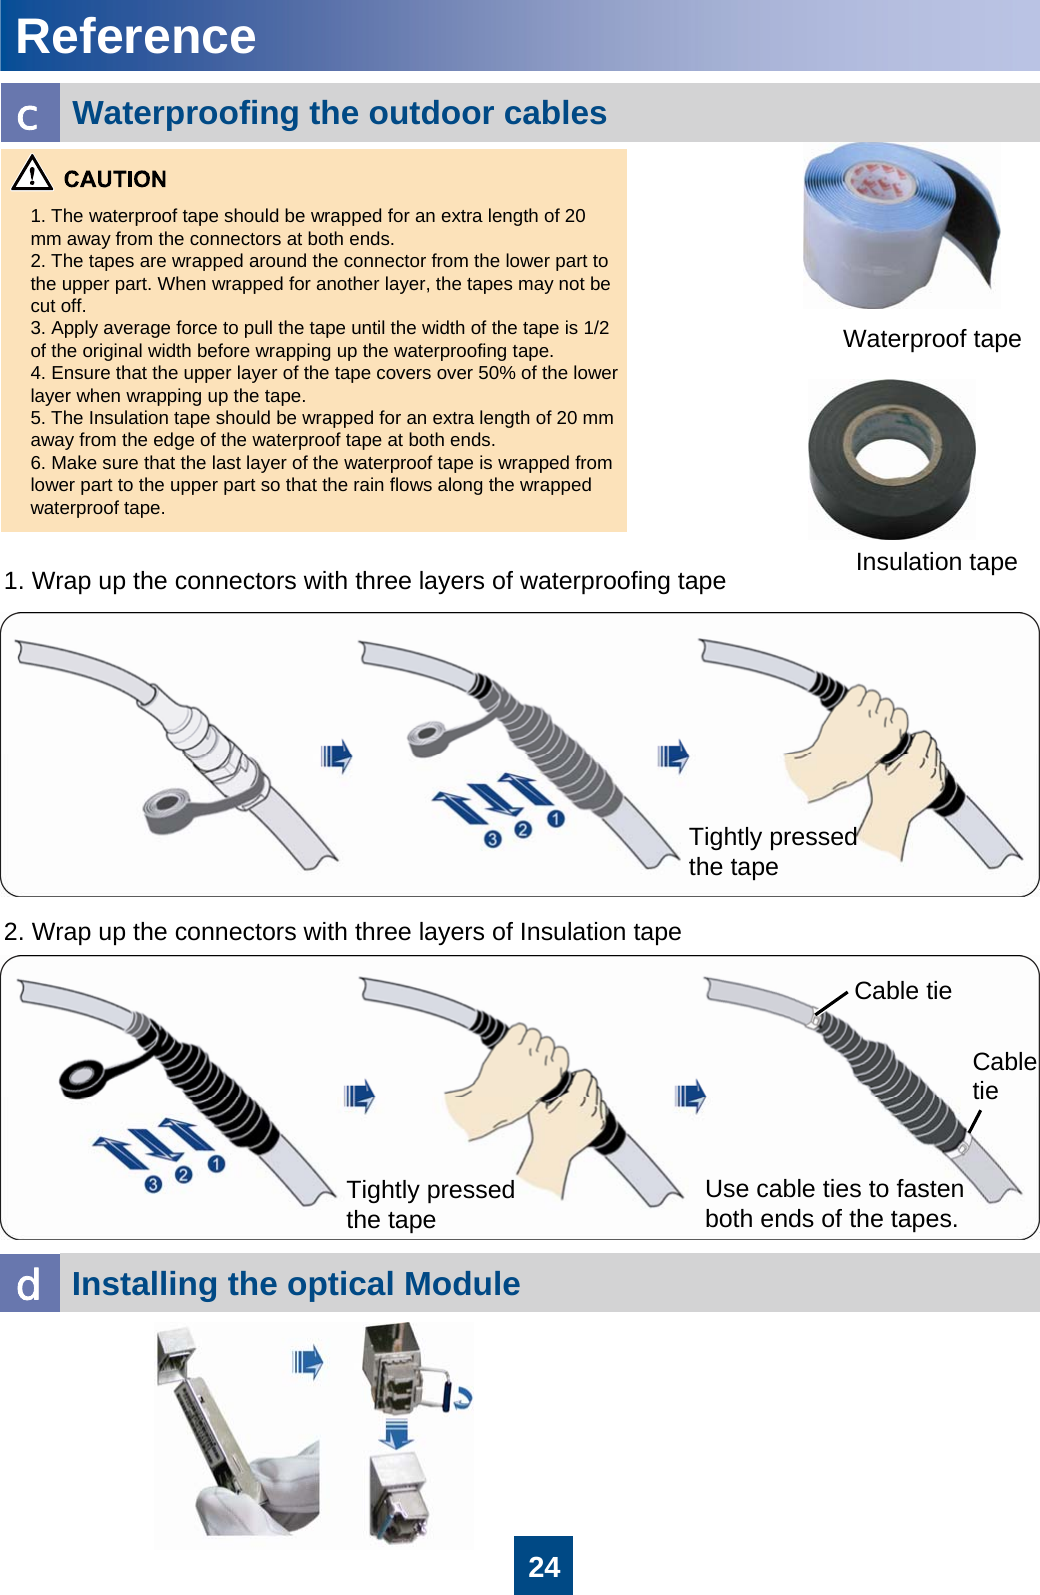 241. The waterproof tape should be wrapped for an extra length of 20 mm away from the connectors at both ends. 2. The tapes are wrapped around the connector from the lower part to the upper part. When wrapped for another layer, the tapes may not be cut off.3. Apply average force to pull the tape until the width of the tape is 1/2 of the original width before wrapping up the waterproofing tape.4. Ensure that the upper layer of the tape covers over 50% of the lower layer when wrapping up the tape.5. The Insulation tape should be wrapped for an extra length of 20 mm away from the edge of the waterproof tape at both ends.6. Make sure that the last layer of the waterproof tape is wrapped from lower part to the upper part so that the rain flows along the wrapped waterproof tape.Waterproof tapeInsulation tape1. Wrap up the connectors with three layers of waterproofing tape2. Wrap up the connectors with three layers of Insulation tapeTightly pressed the tapeTightly pressed the tapeUse cable ties to fasten both ends of the tapes.Cable tieCable tieWaterproofing the outdoor cablescReferenceInstalling the optical Module d